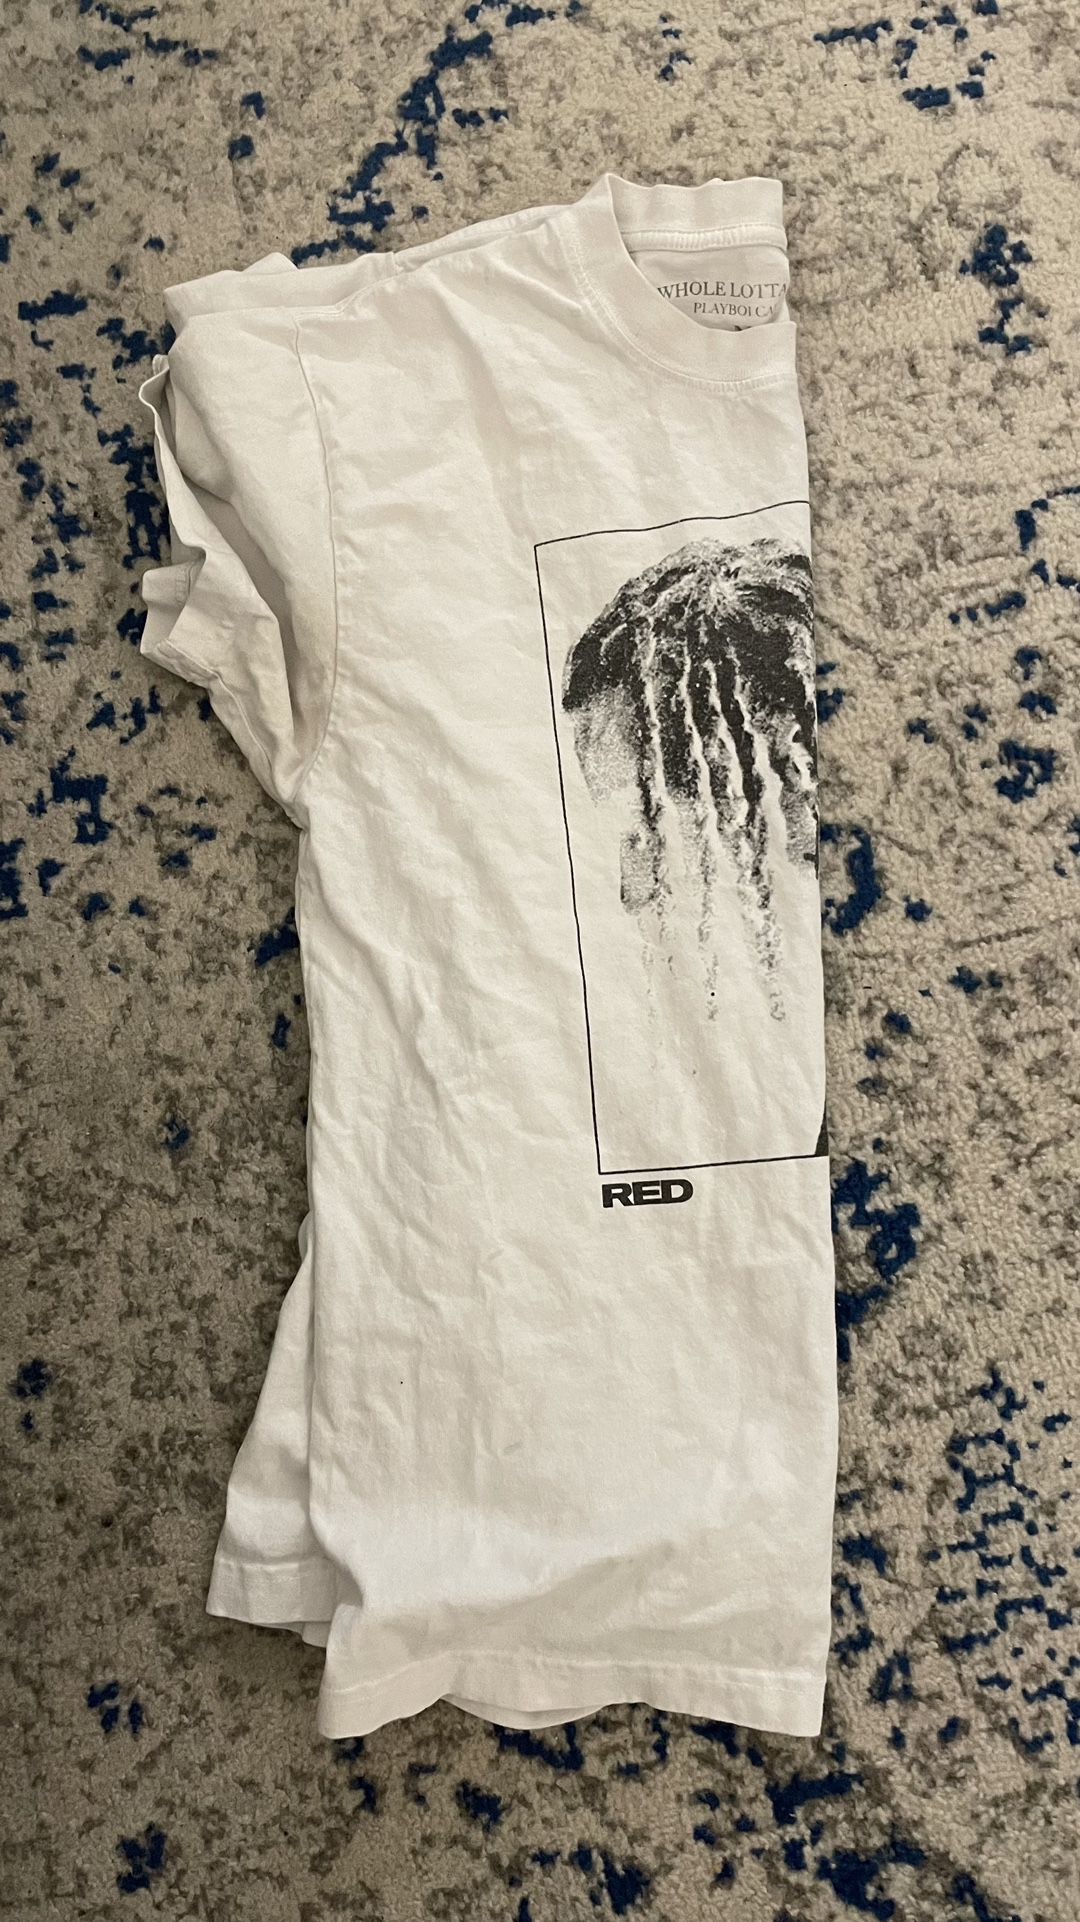 Playboi Carti Rockstar Made Concert T-shirt for Sale in West Hempstead, NY  - OfferUp